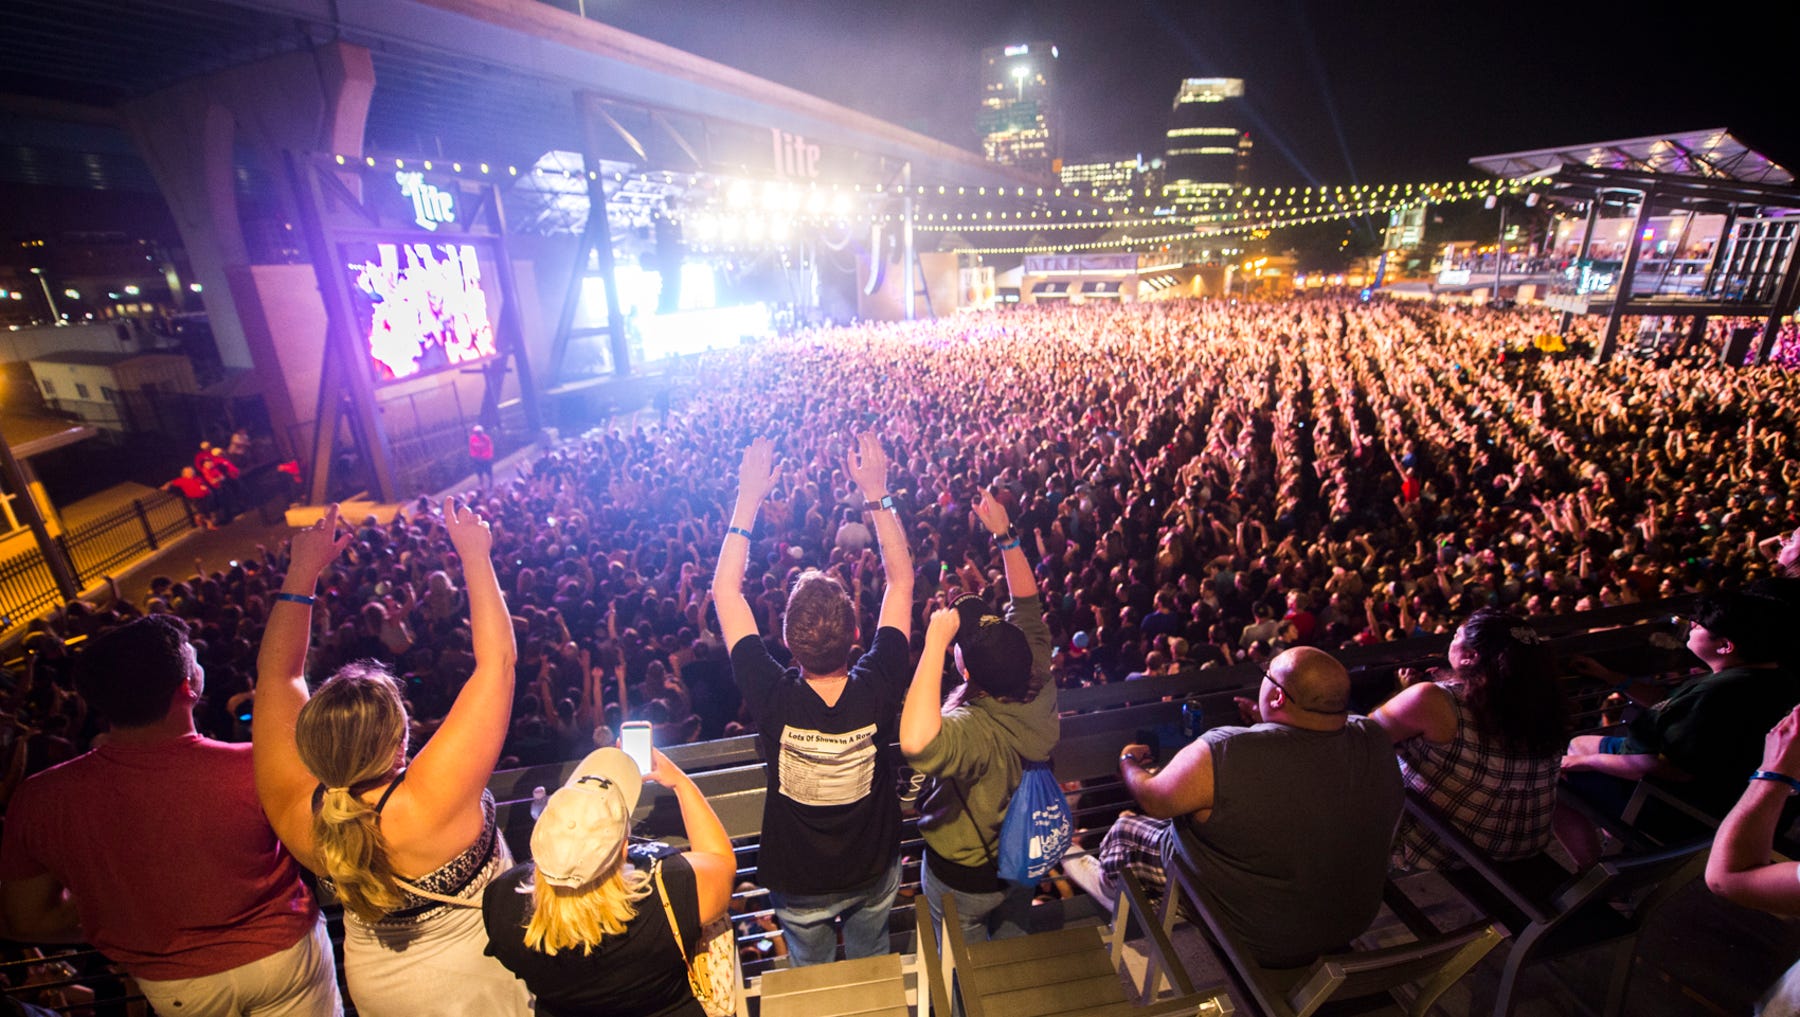 Top 5 Wisconsin music festivals to check this summer